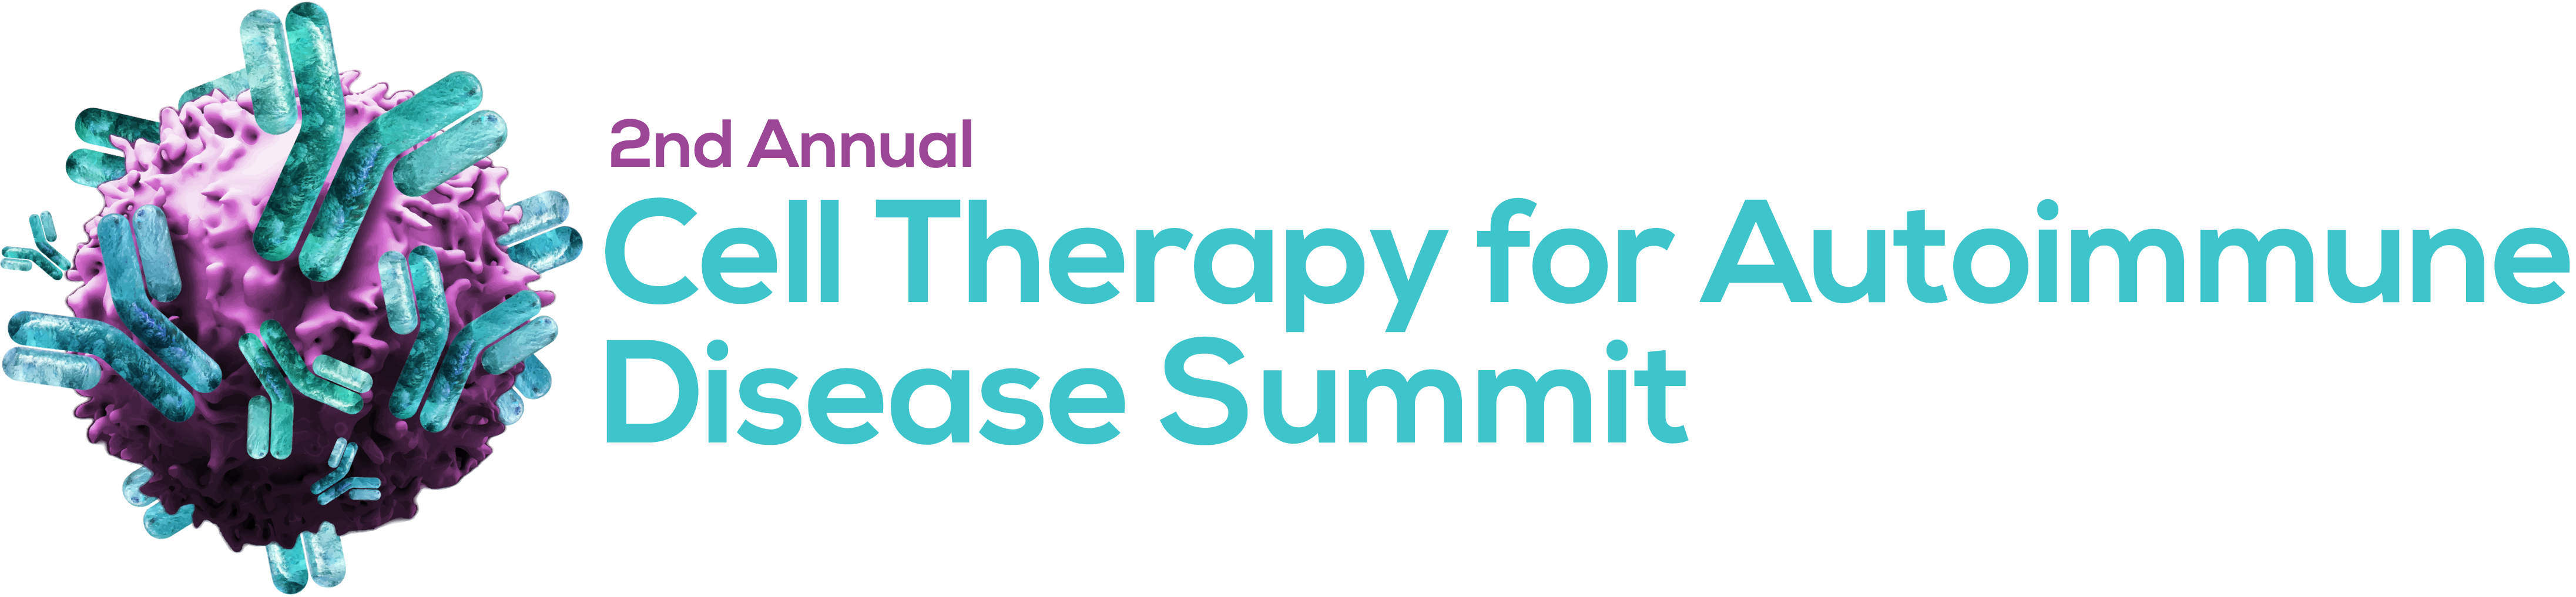 2nd Annual Cell Therapy for Autoimmune Disease Summit NO STRAPLINE